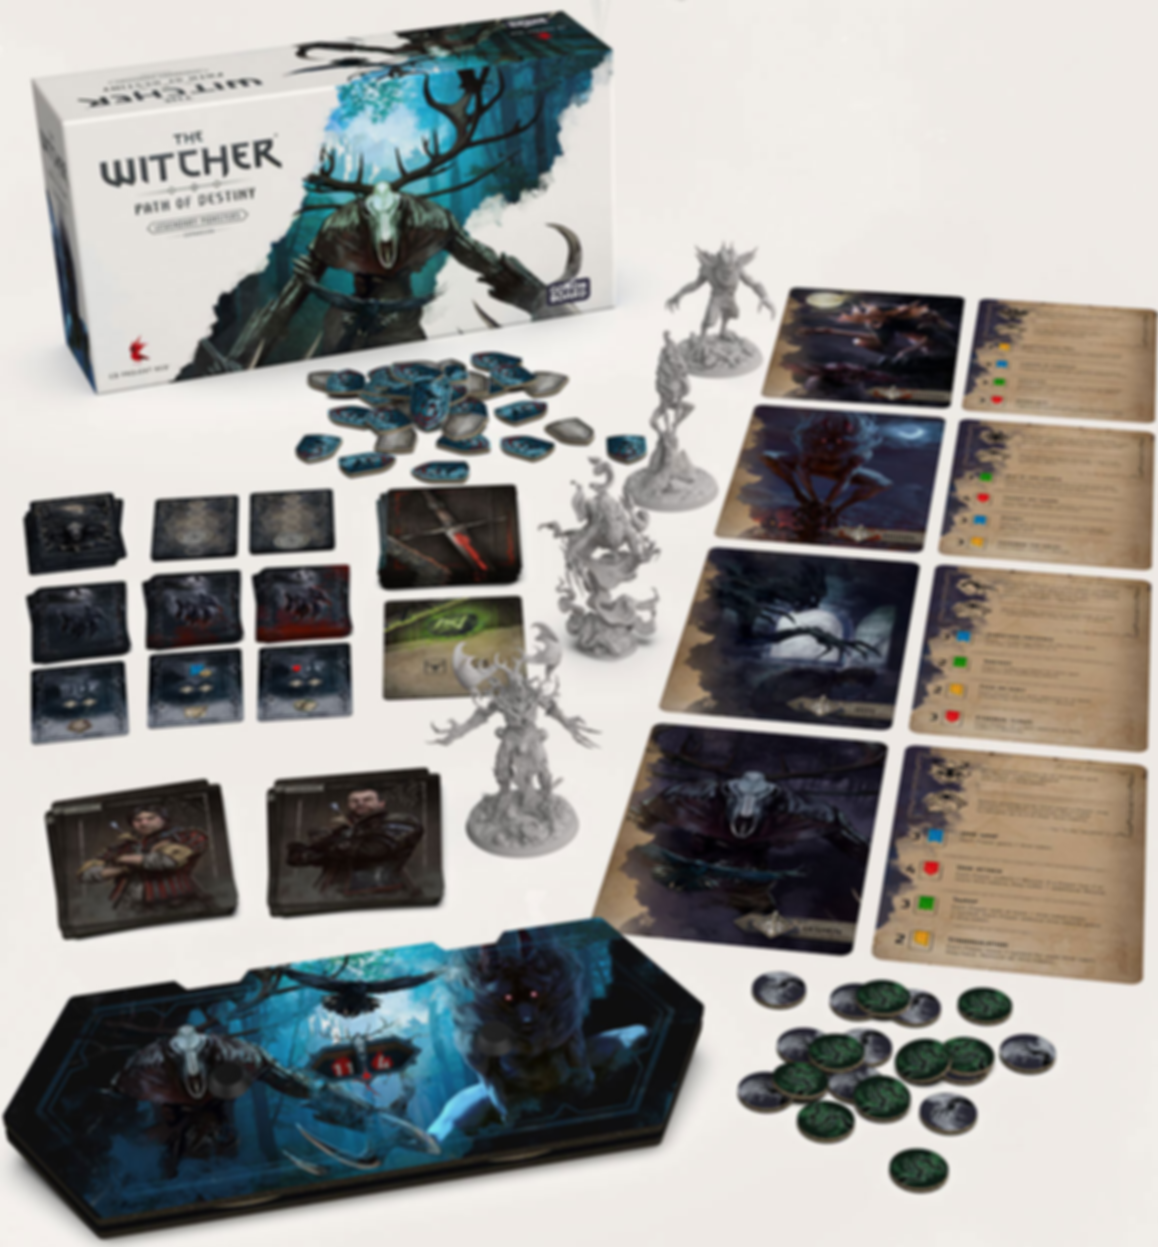 The Witcher: Path Of Destiny – Legendary Monsters components